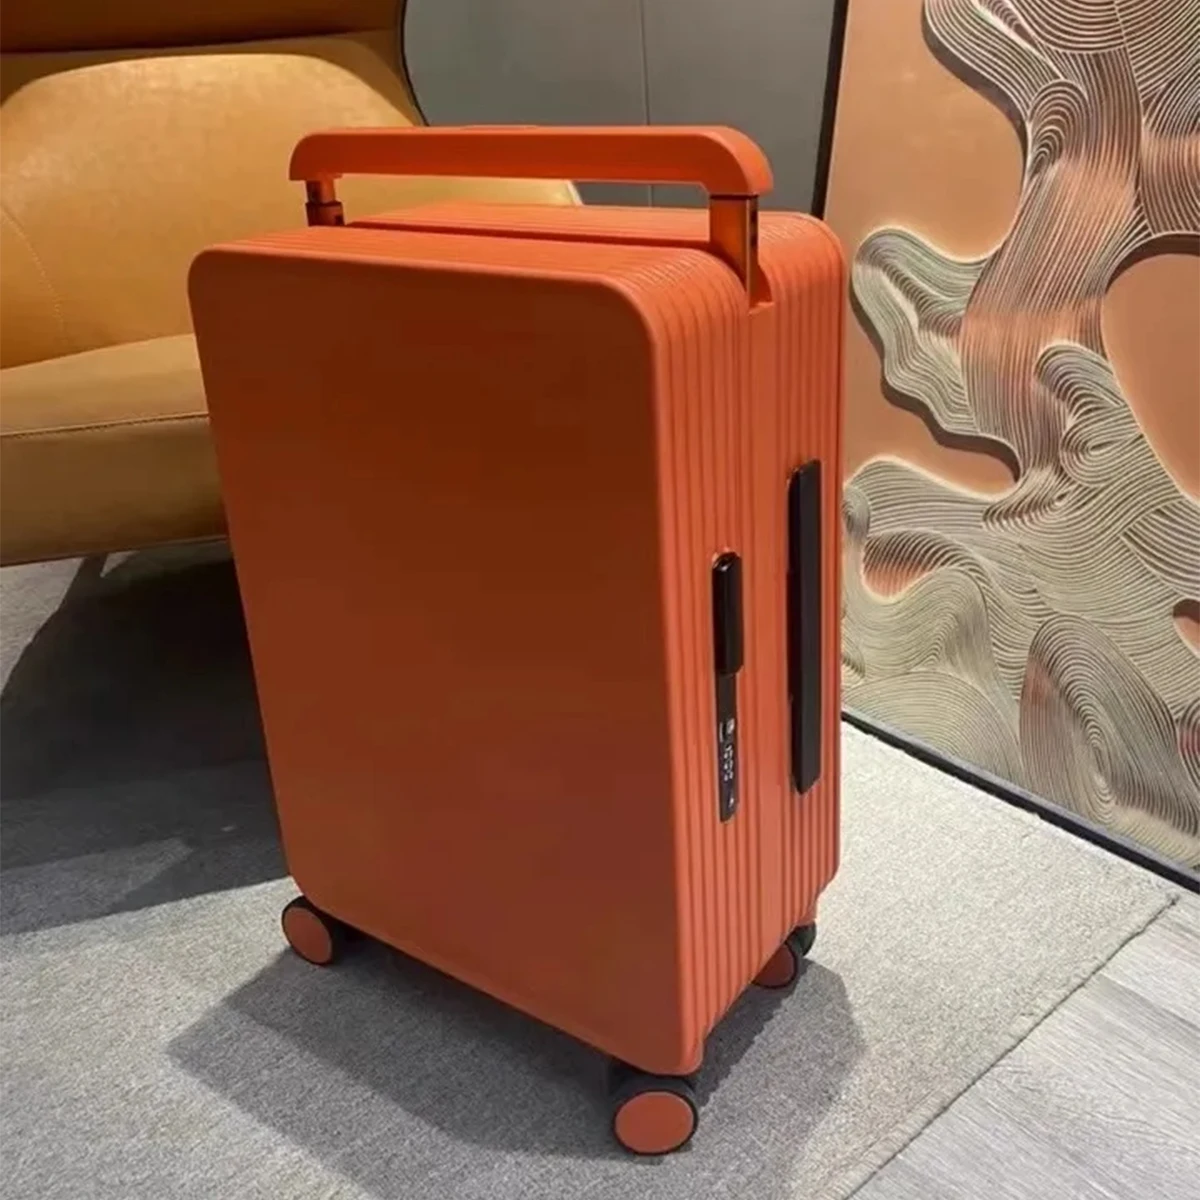 

Wide Handle Travel Luggage Suitcase Rolling Spinner Wheels Hardside Abs Tsa Lock 20 24 Inch Unisex Traveling Trolley Case